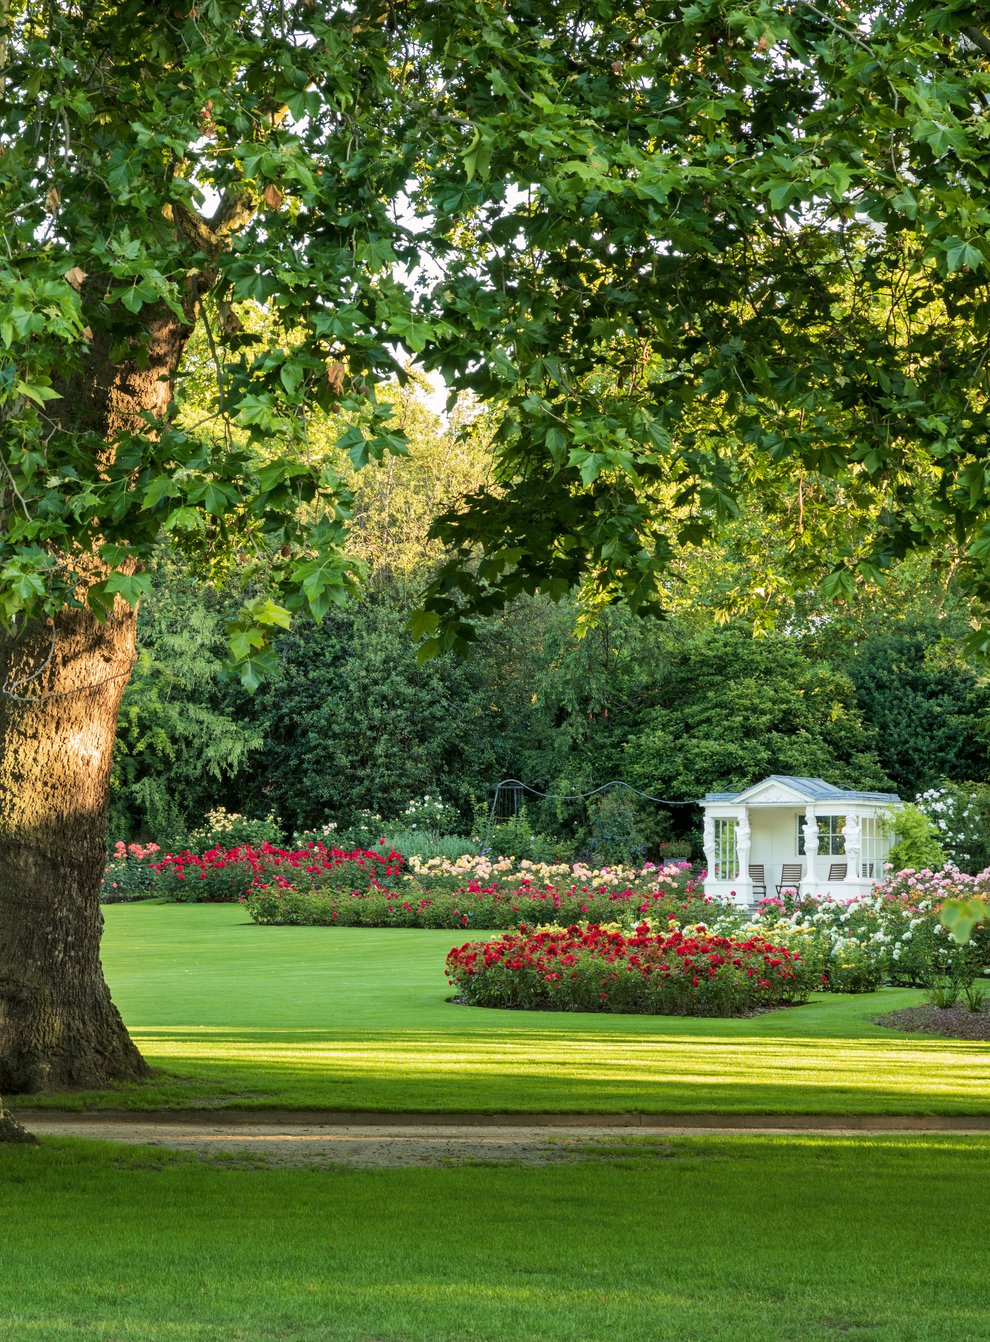 Buckingham Palace garden in bloom during the summer